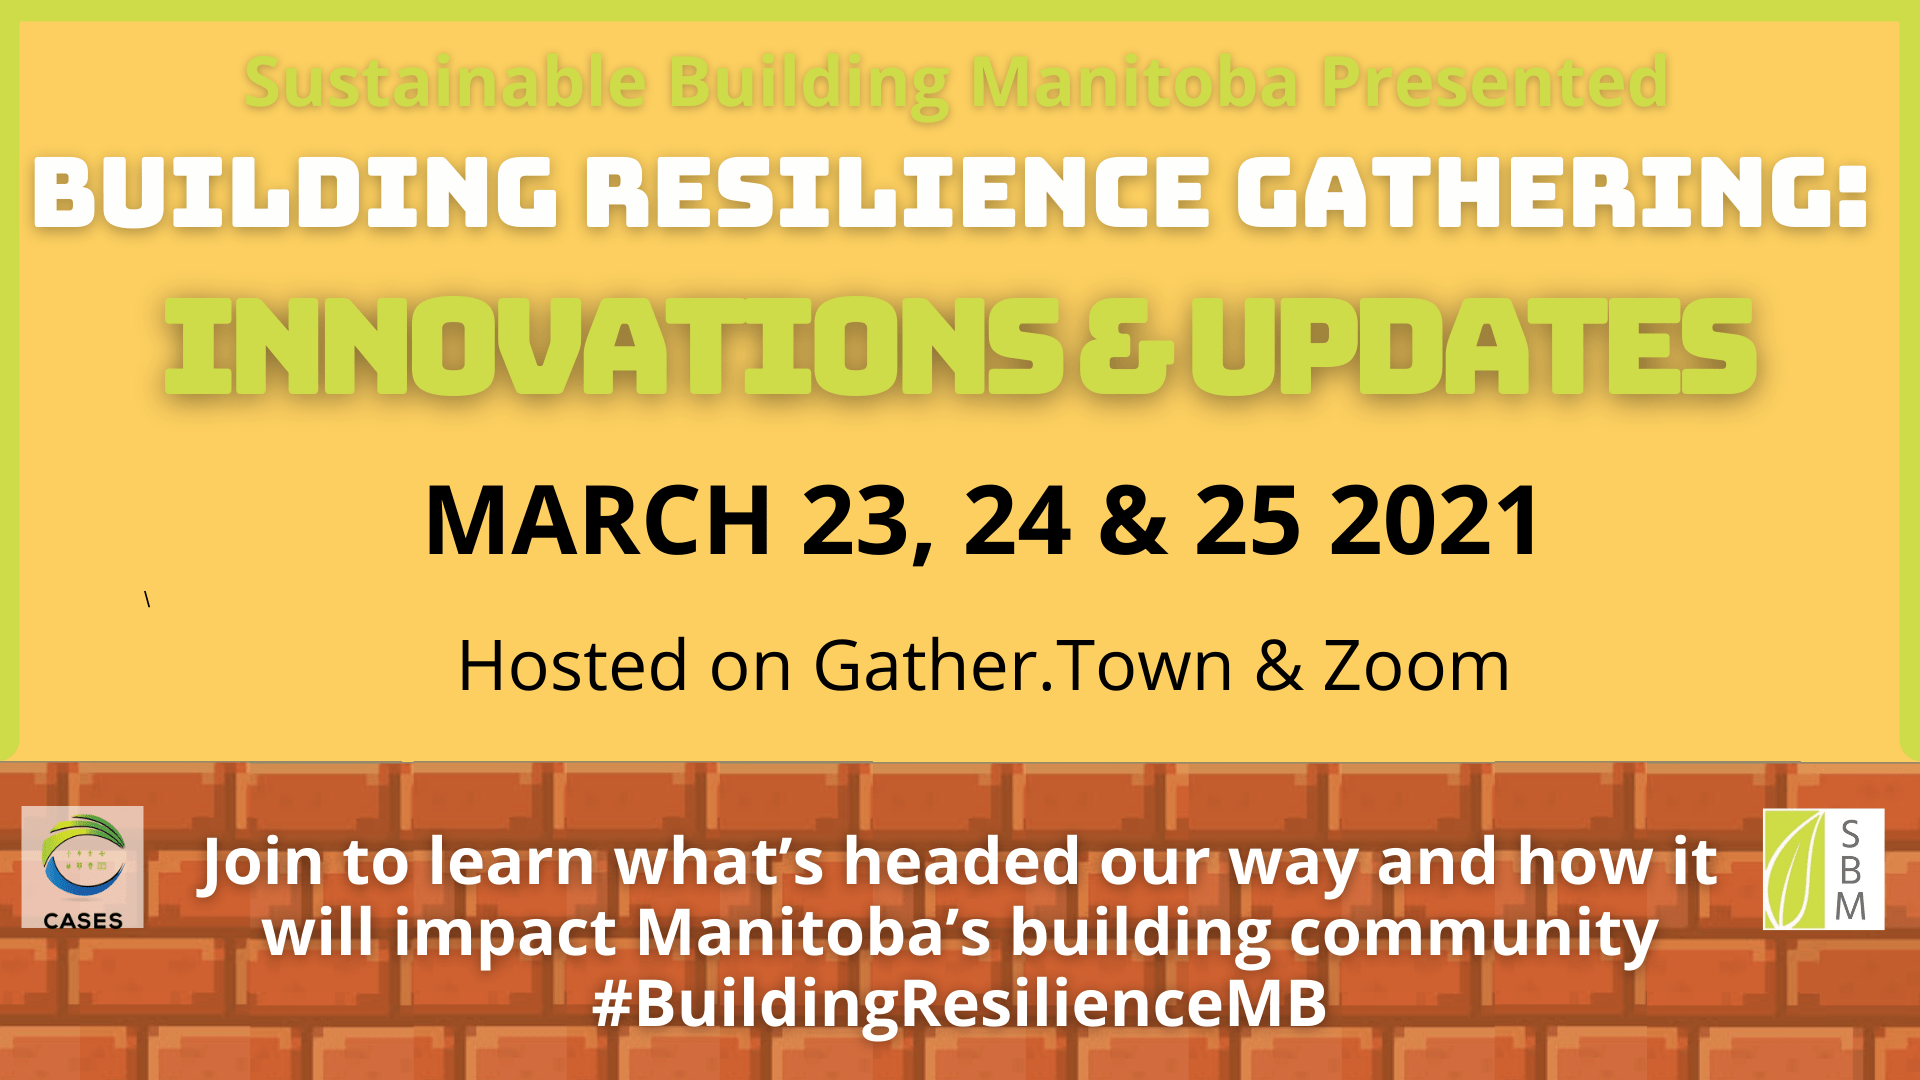 Presents Buiding Resilience Gathering March 23, 24, 25 2021 hosted on gather.Town and Zoom  Join to learn what’s headed our way and how it will impact Manitoba’s building community #BuildingResilienceMB